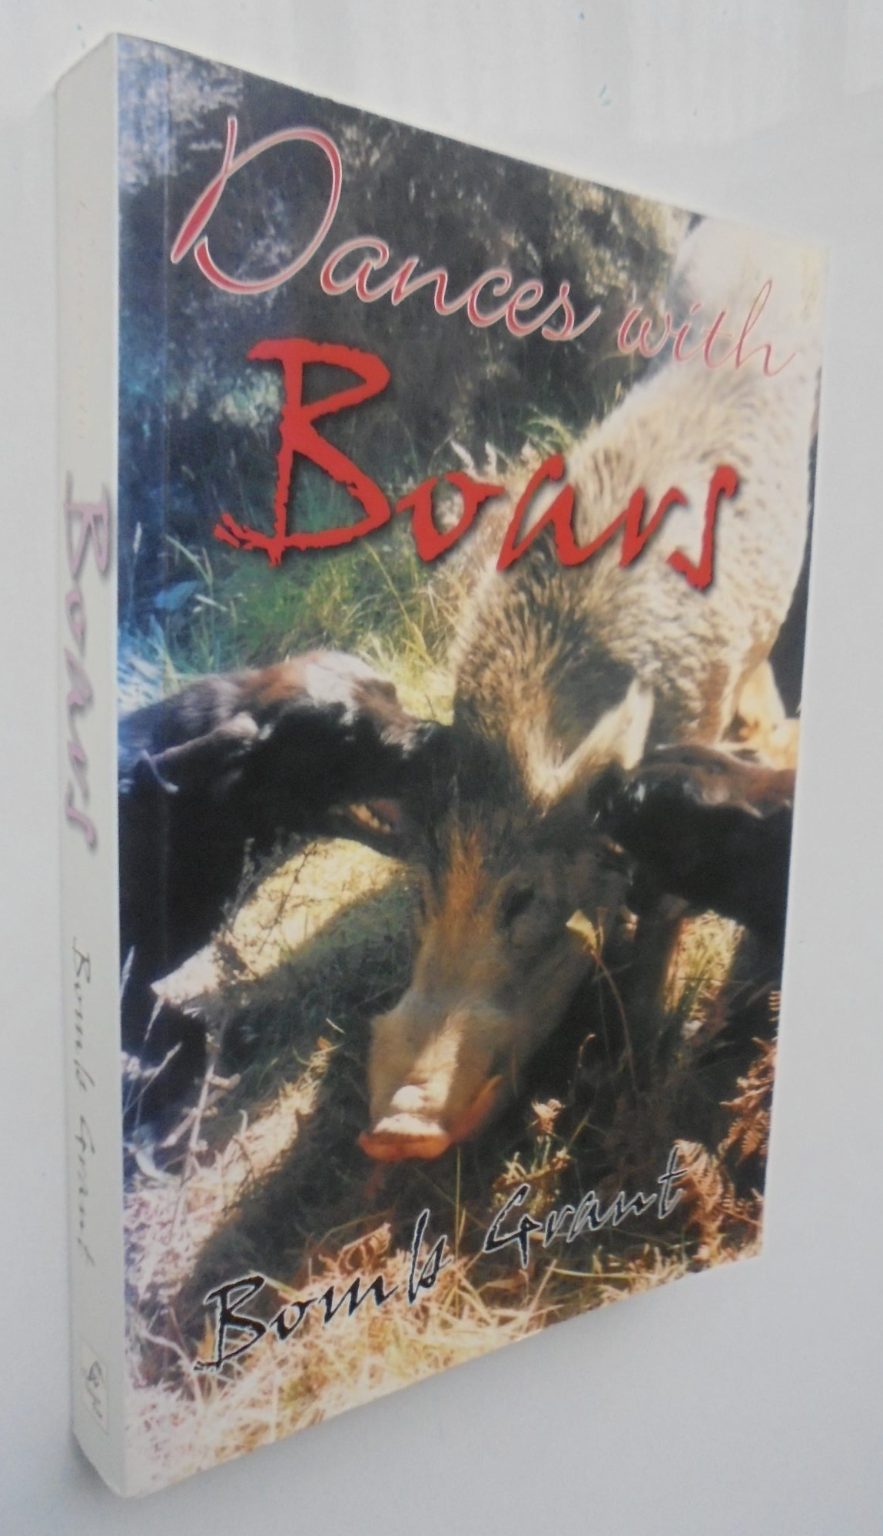 Dances with Boars By Bomb Grant. first edition. SCARCE.